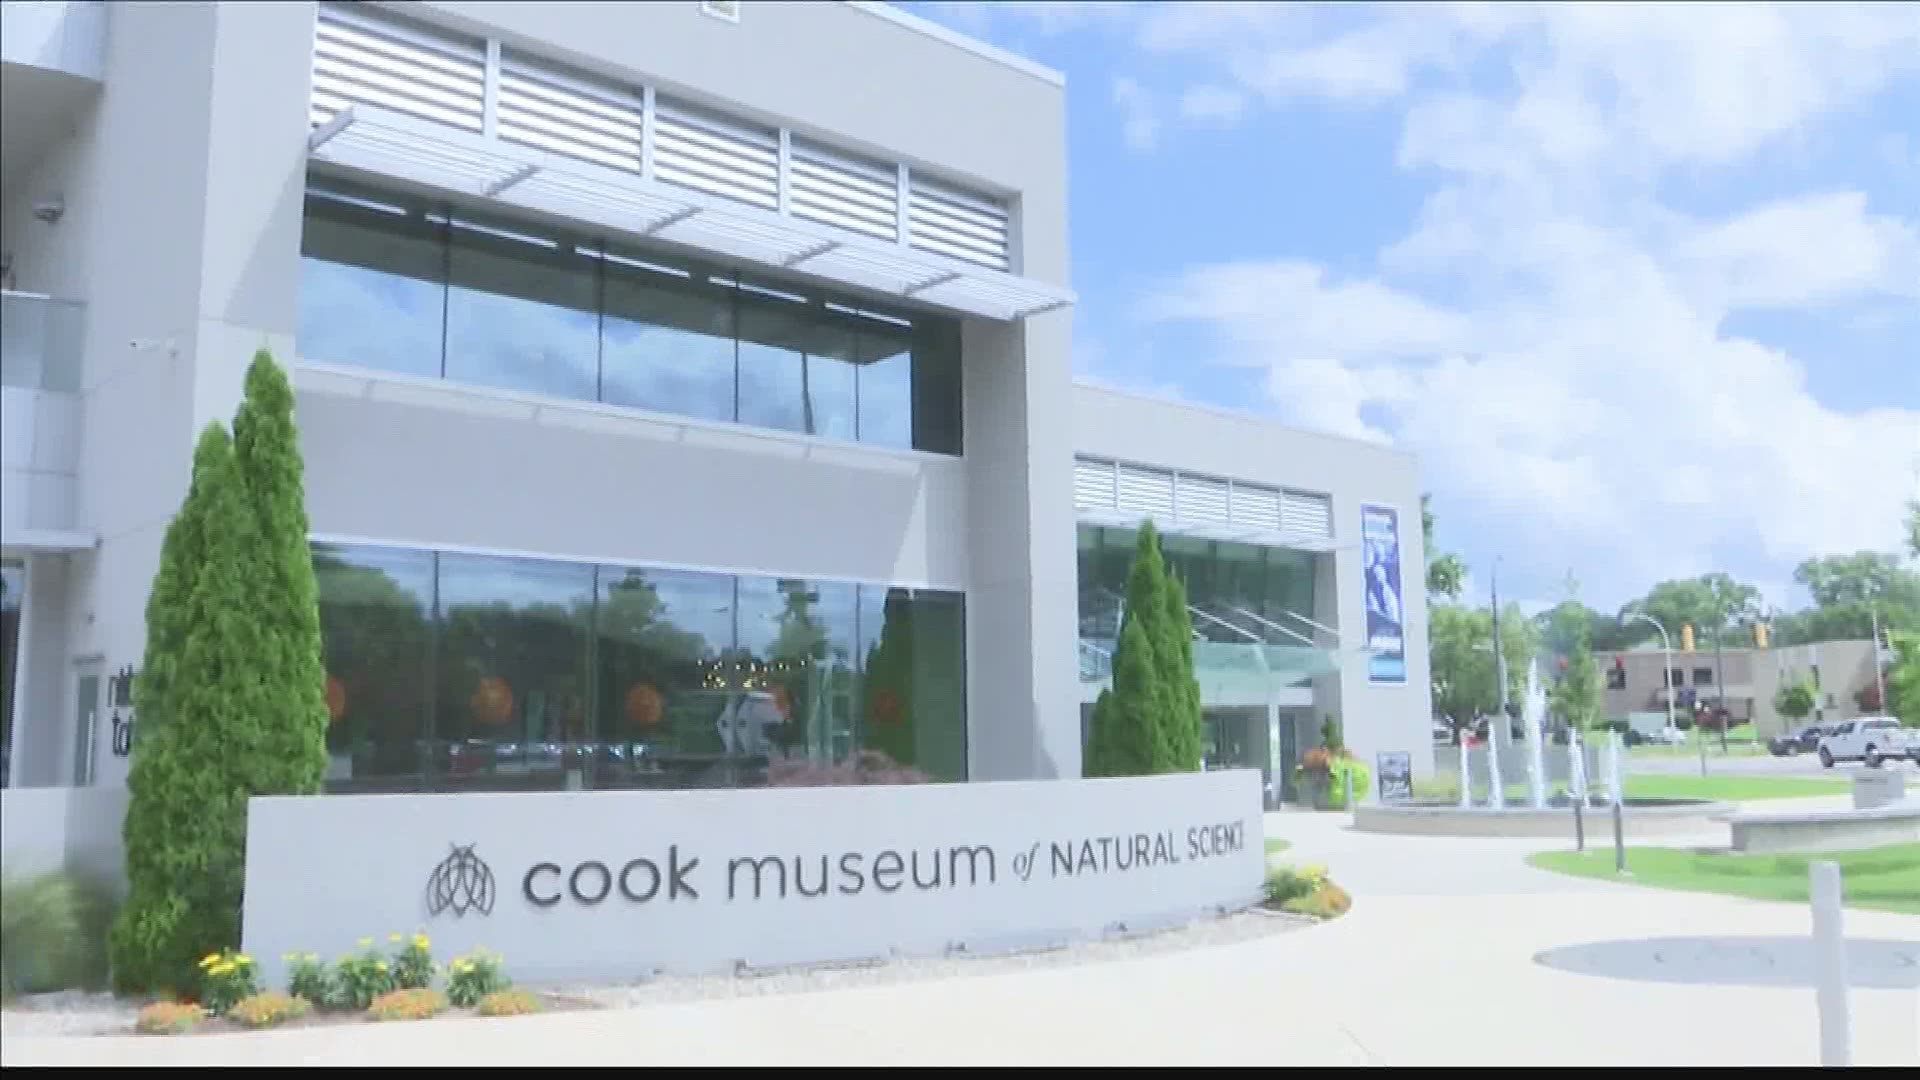 The Cook Museum of Natural Science will be open to the public on July 8th, at 9 a.m.